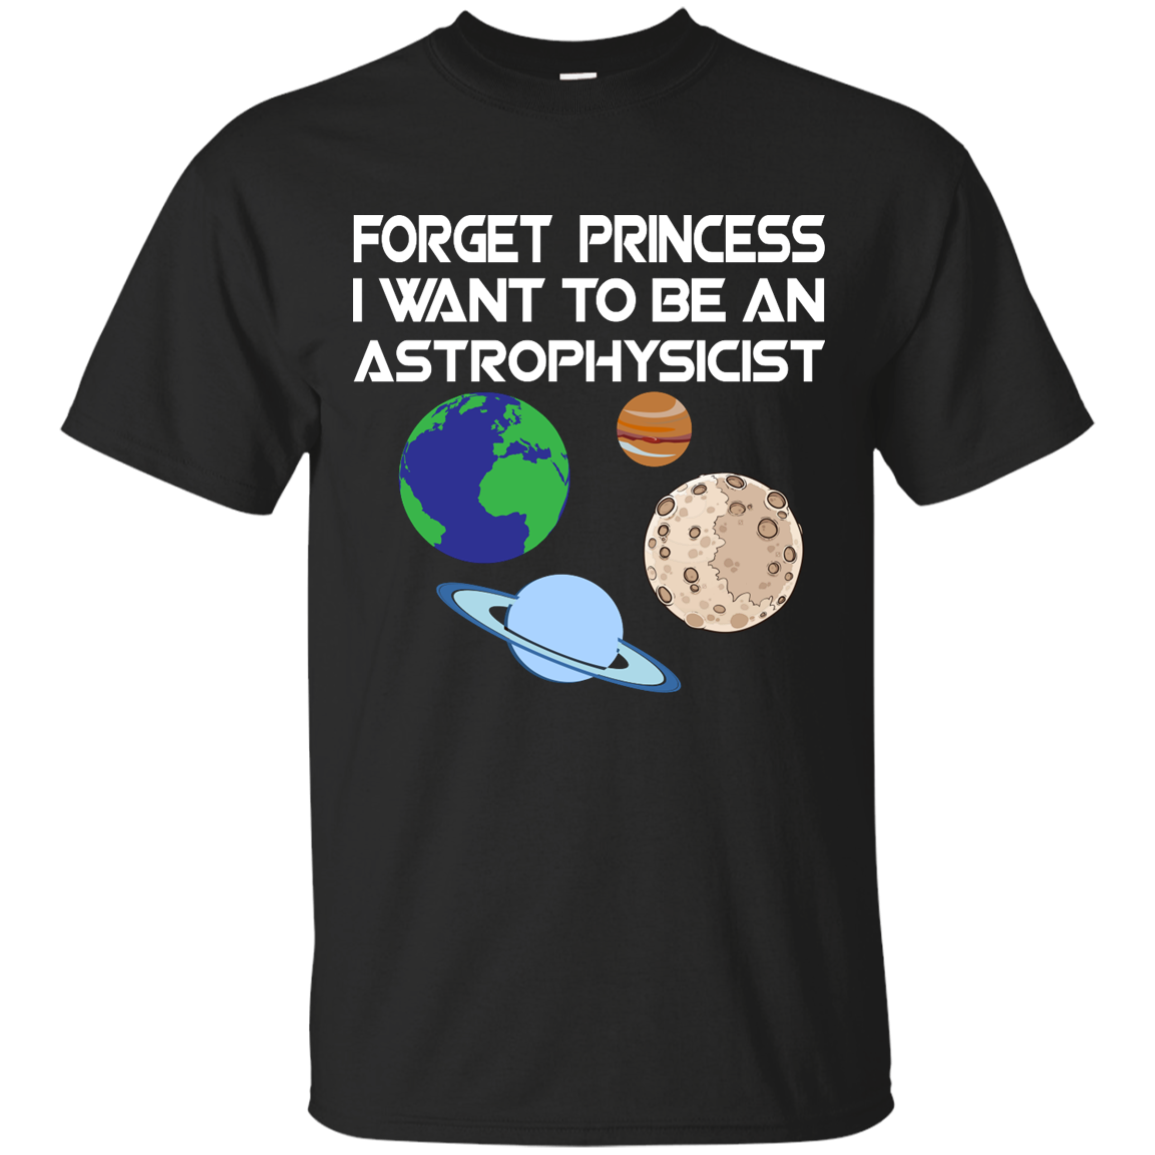 Forget Princess I Want To Be An Astrophysicist shirt, long sleeve